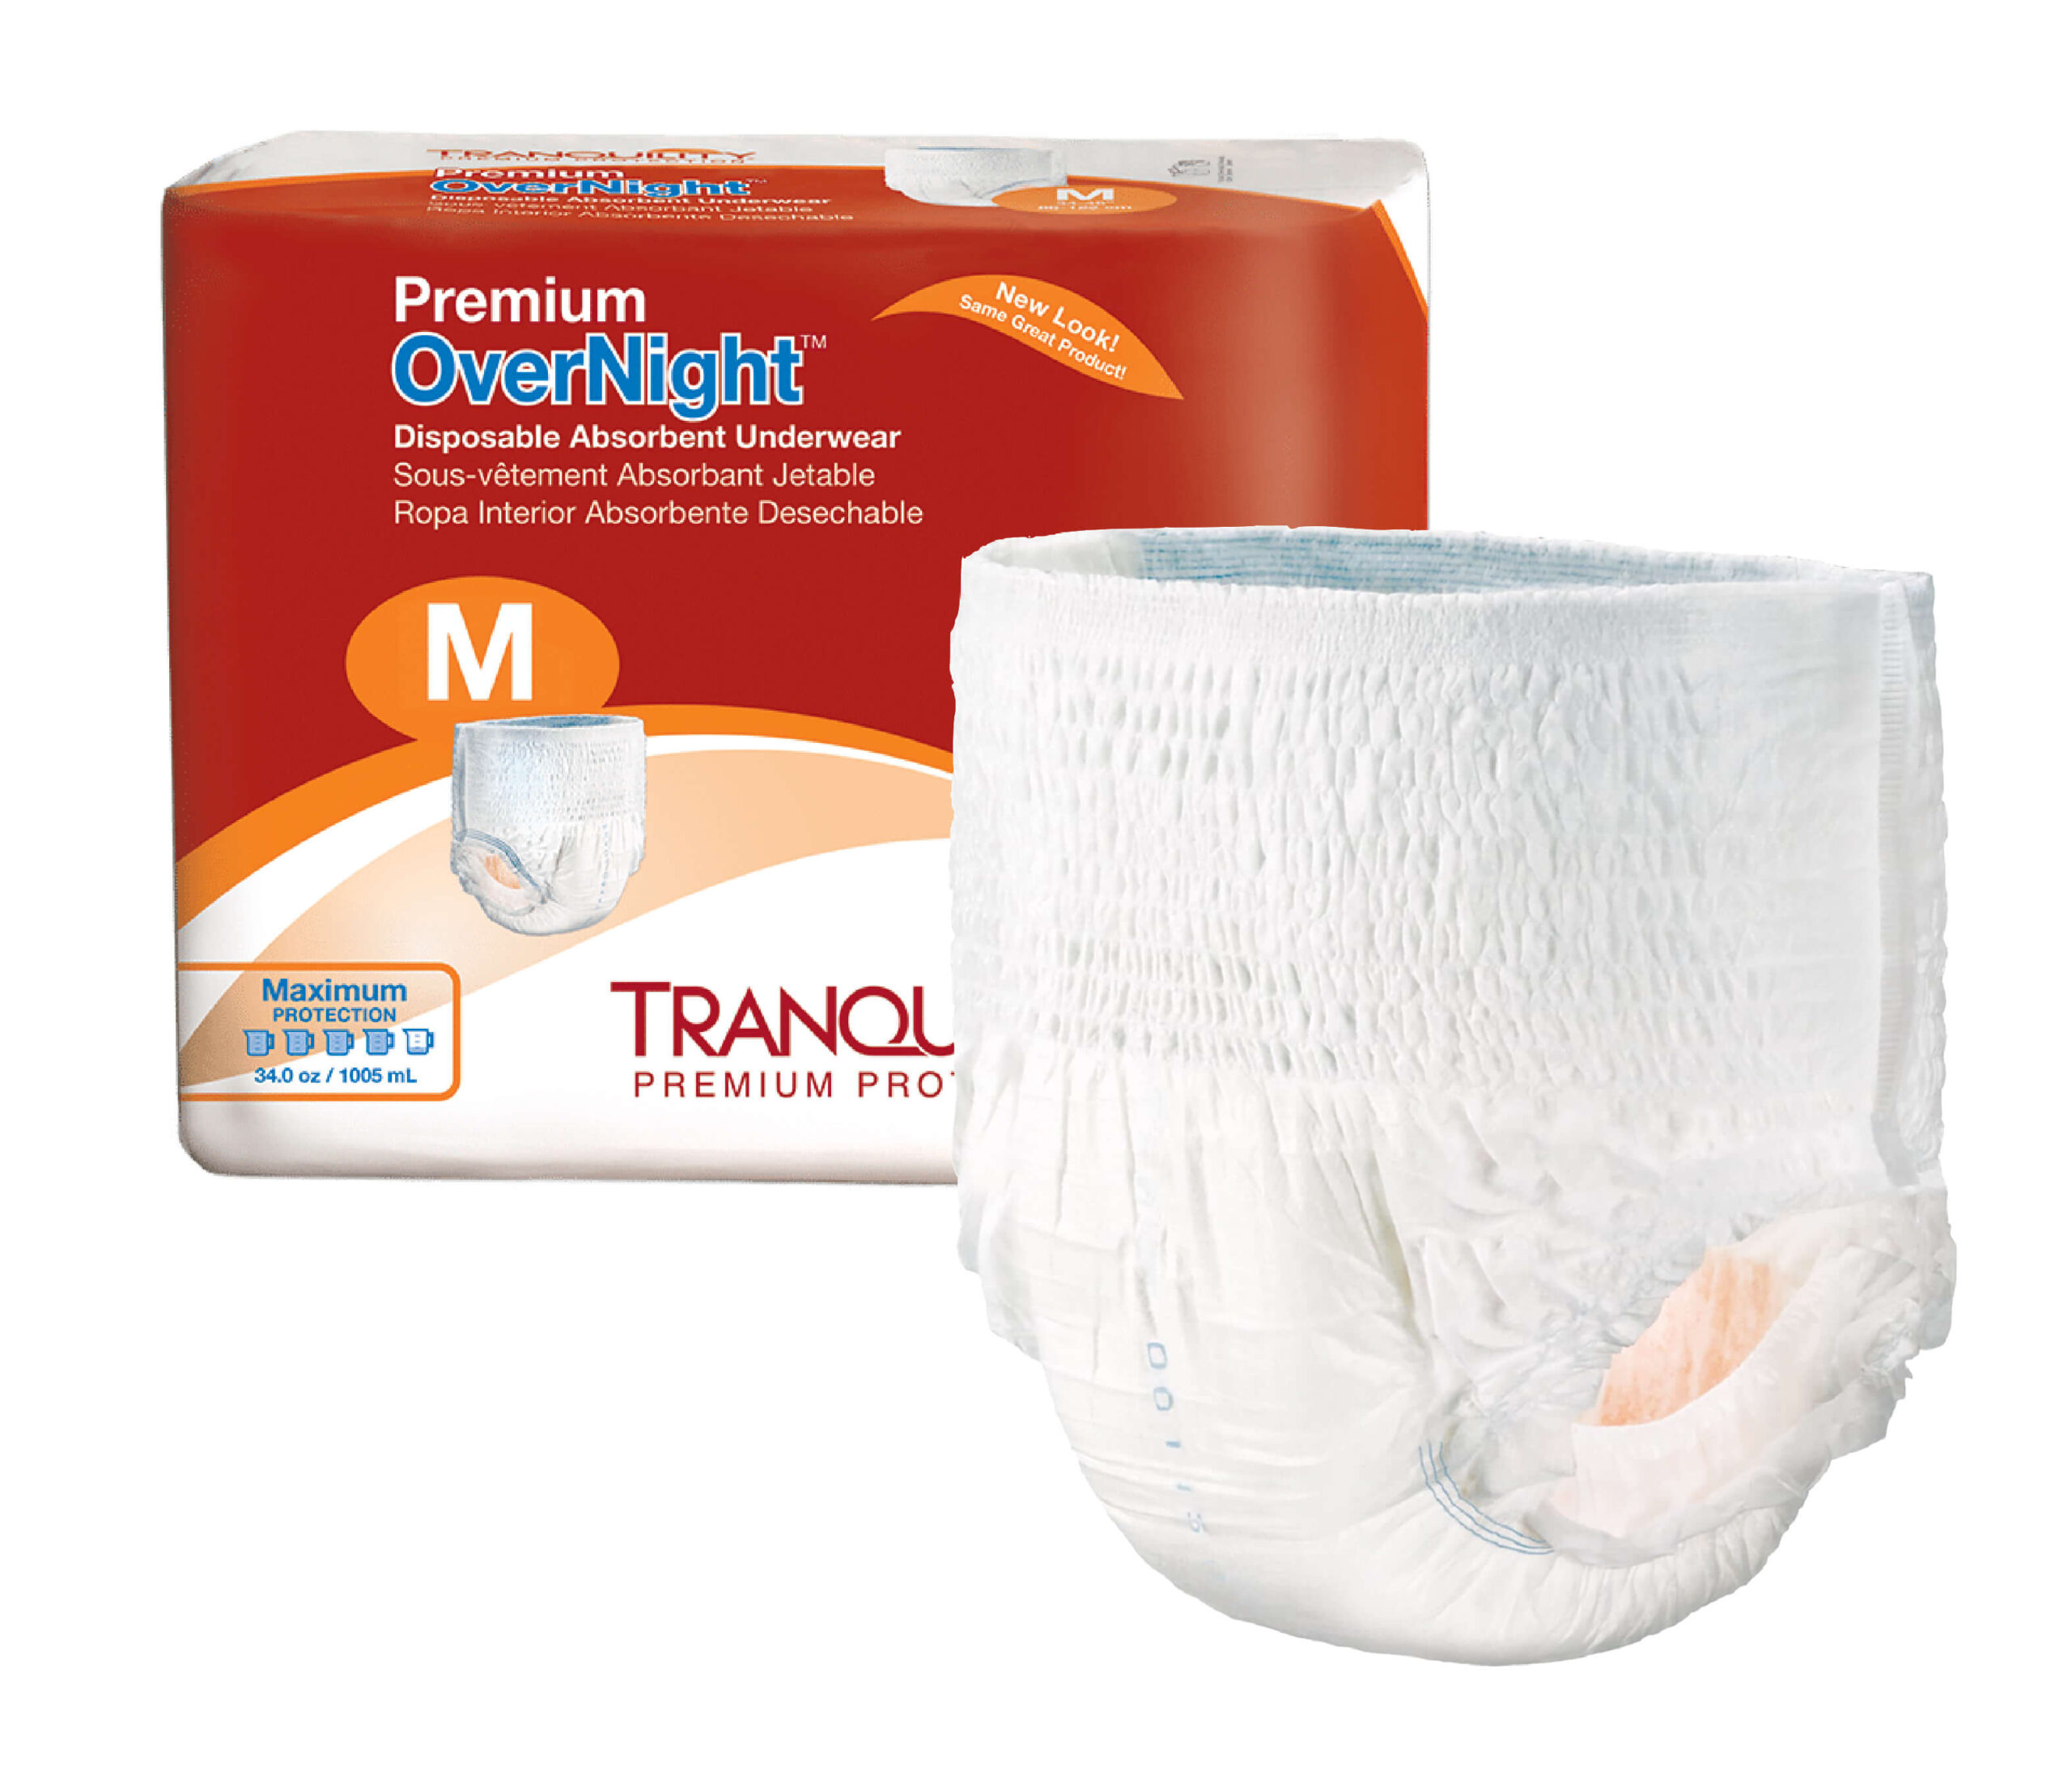 6 Most Popular Types of Adult Diapers With Pros & Cons